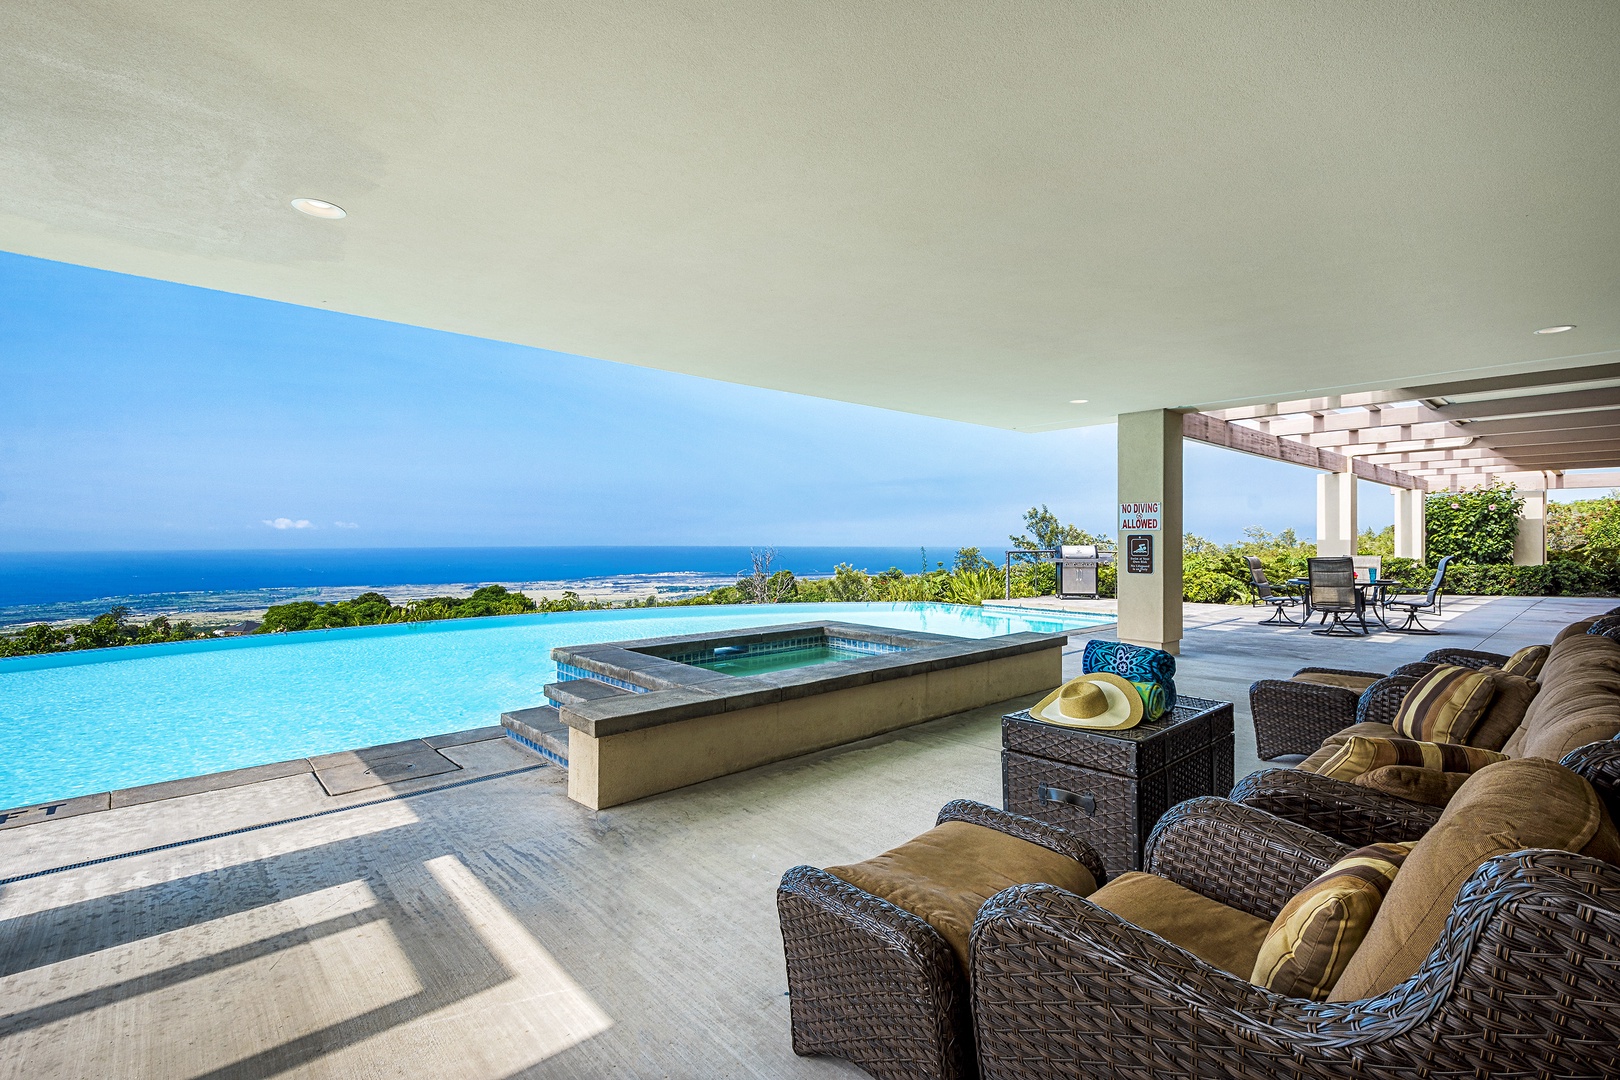 Kailua Kona Vacation Rentals, O'oma Plantation - Covered Pool side seating with a view!